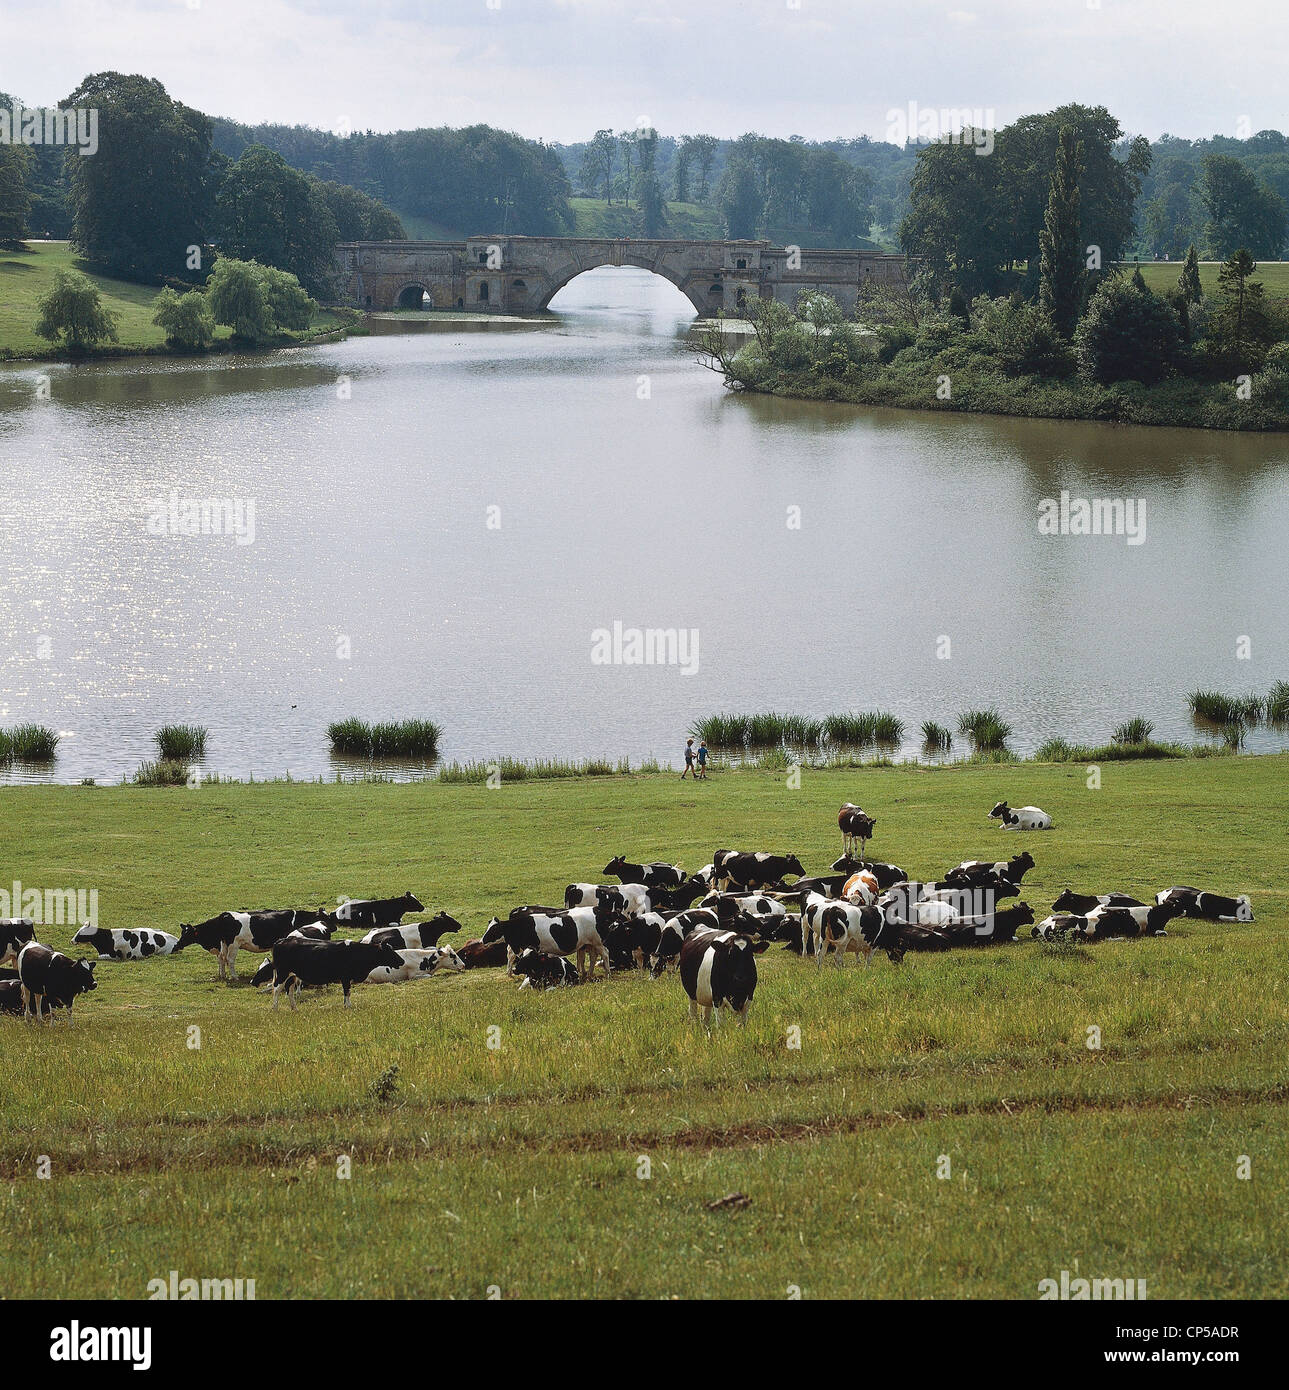 United Kingdom - England - Woodstock. Surroundings of Blenheim Palace. Cattle grazing in the background the Grand Bridge. Stock Photo